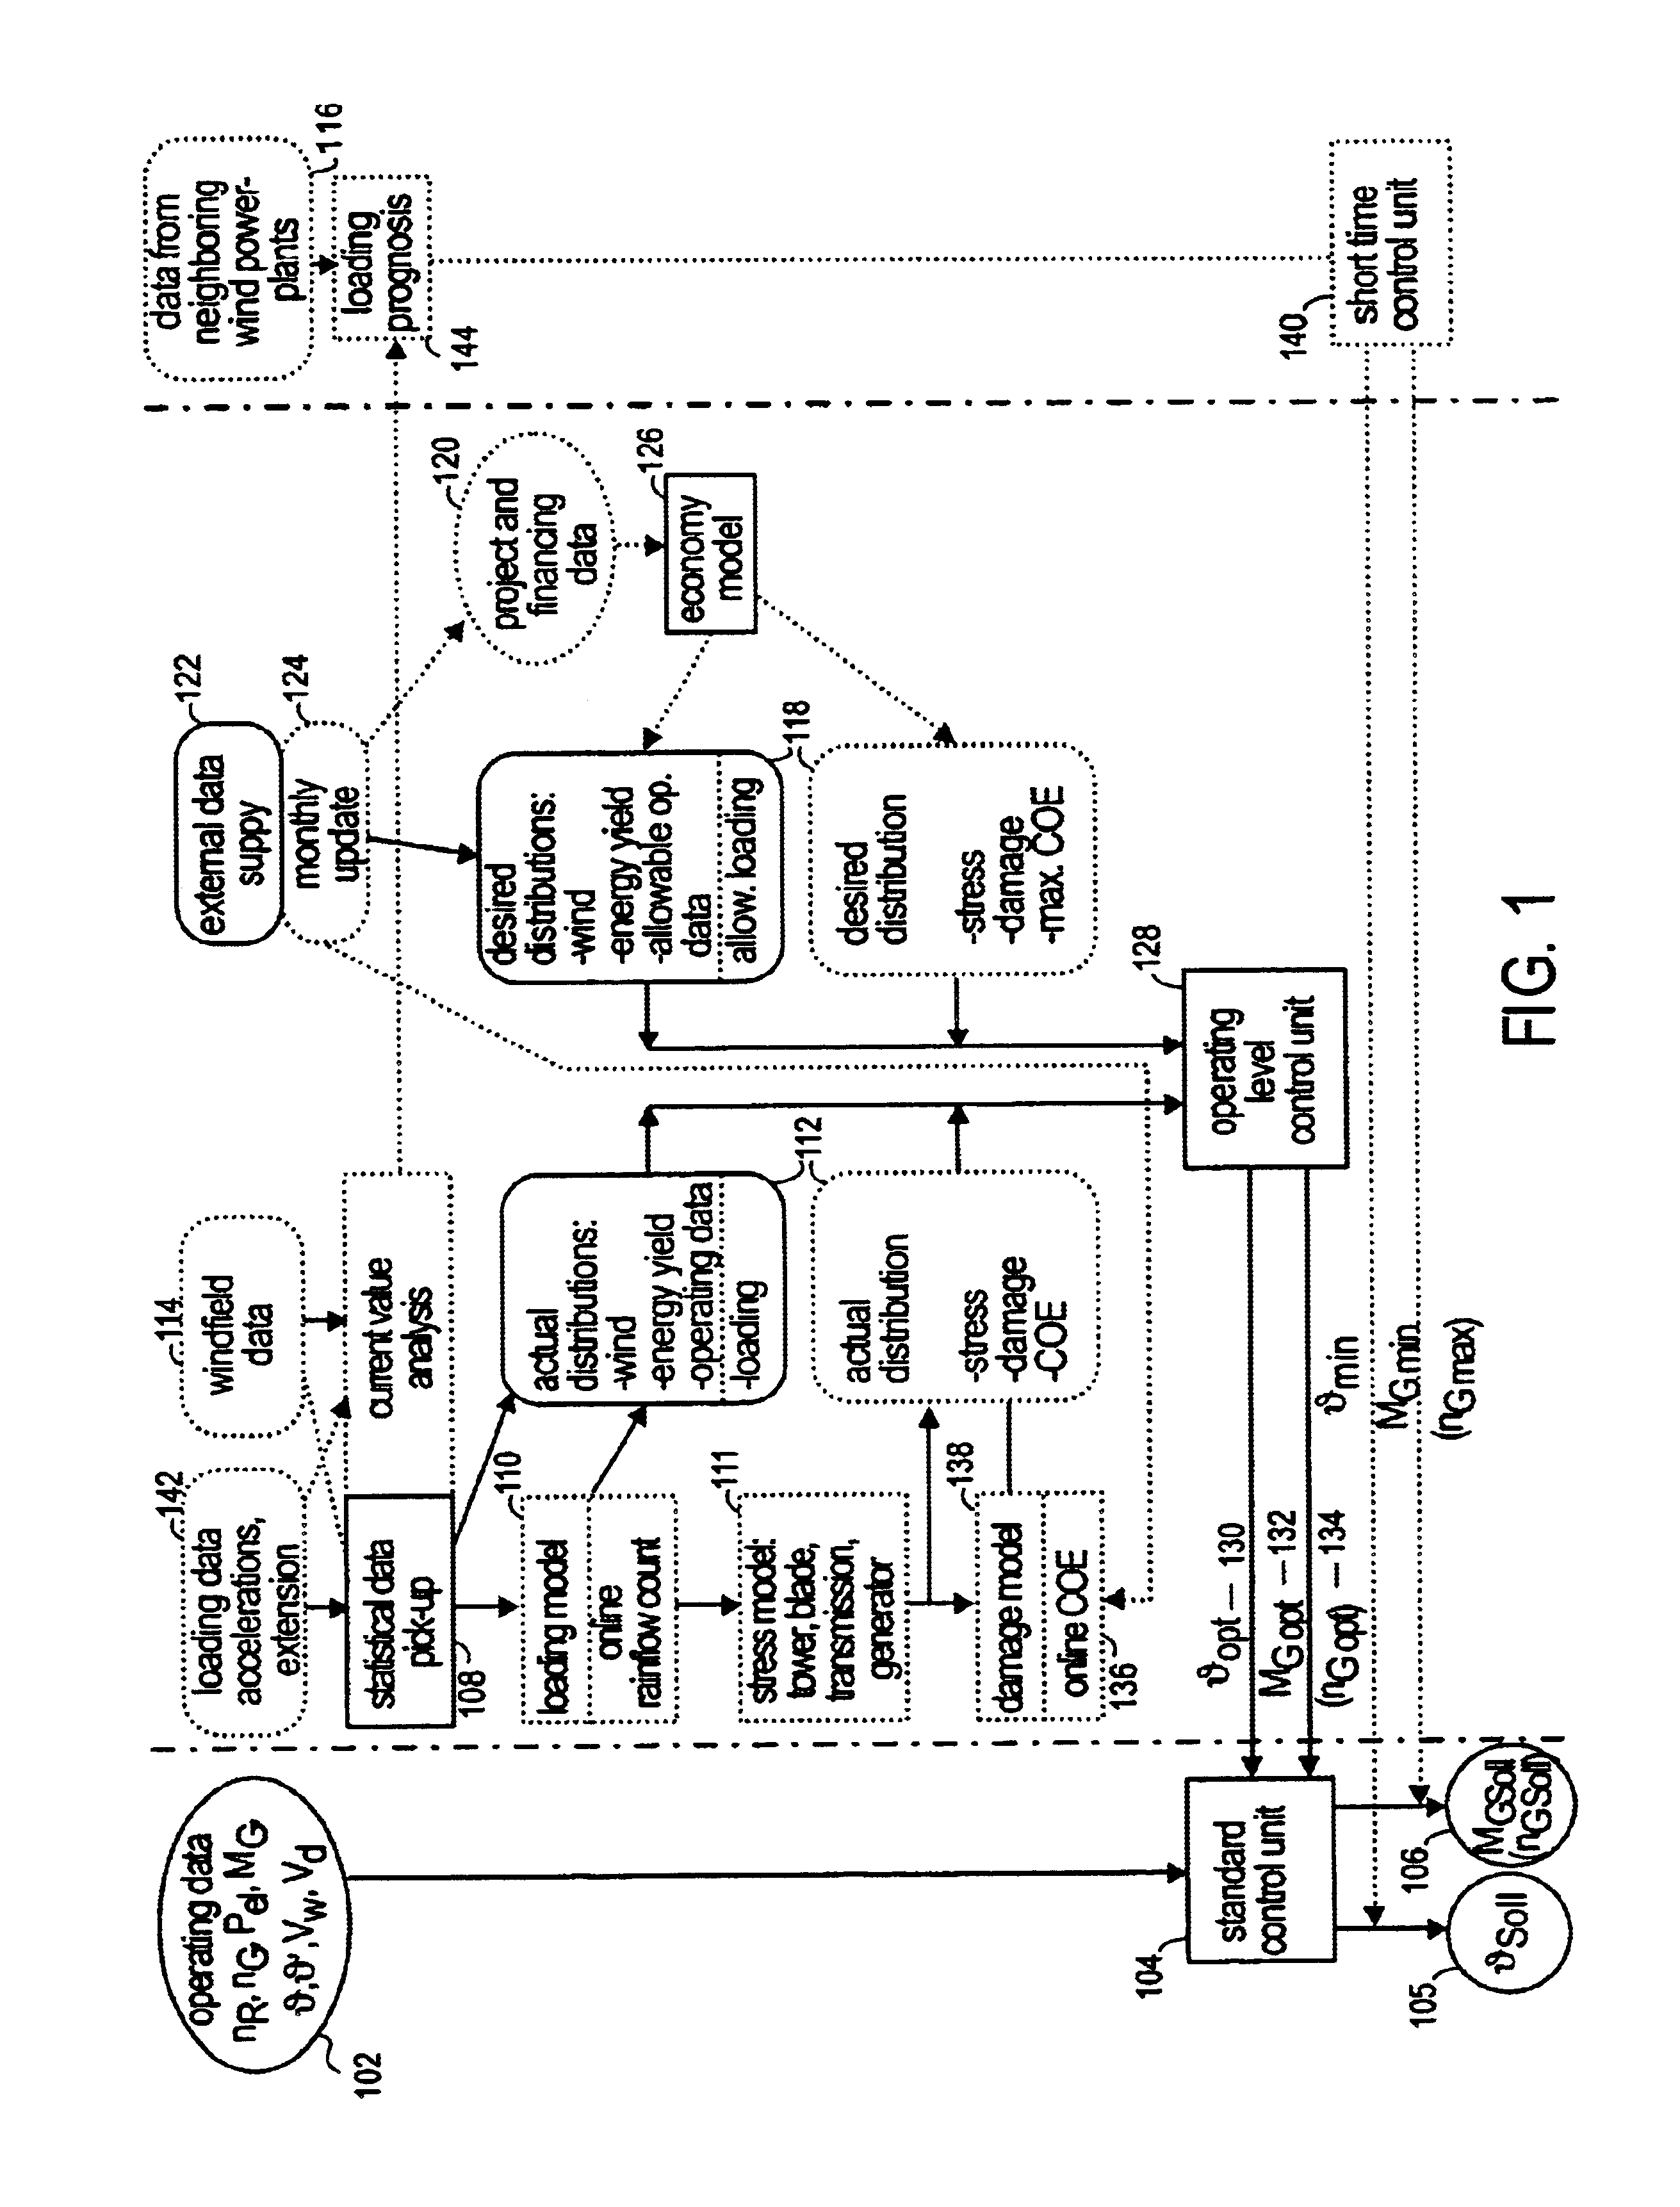 Control system for a wind power plant